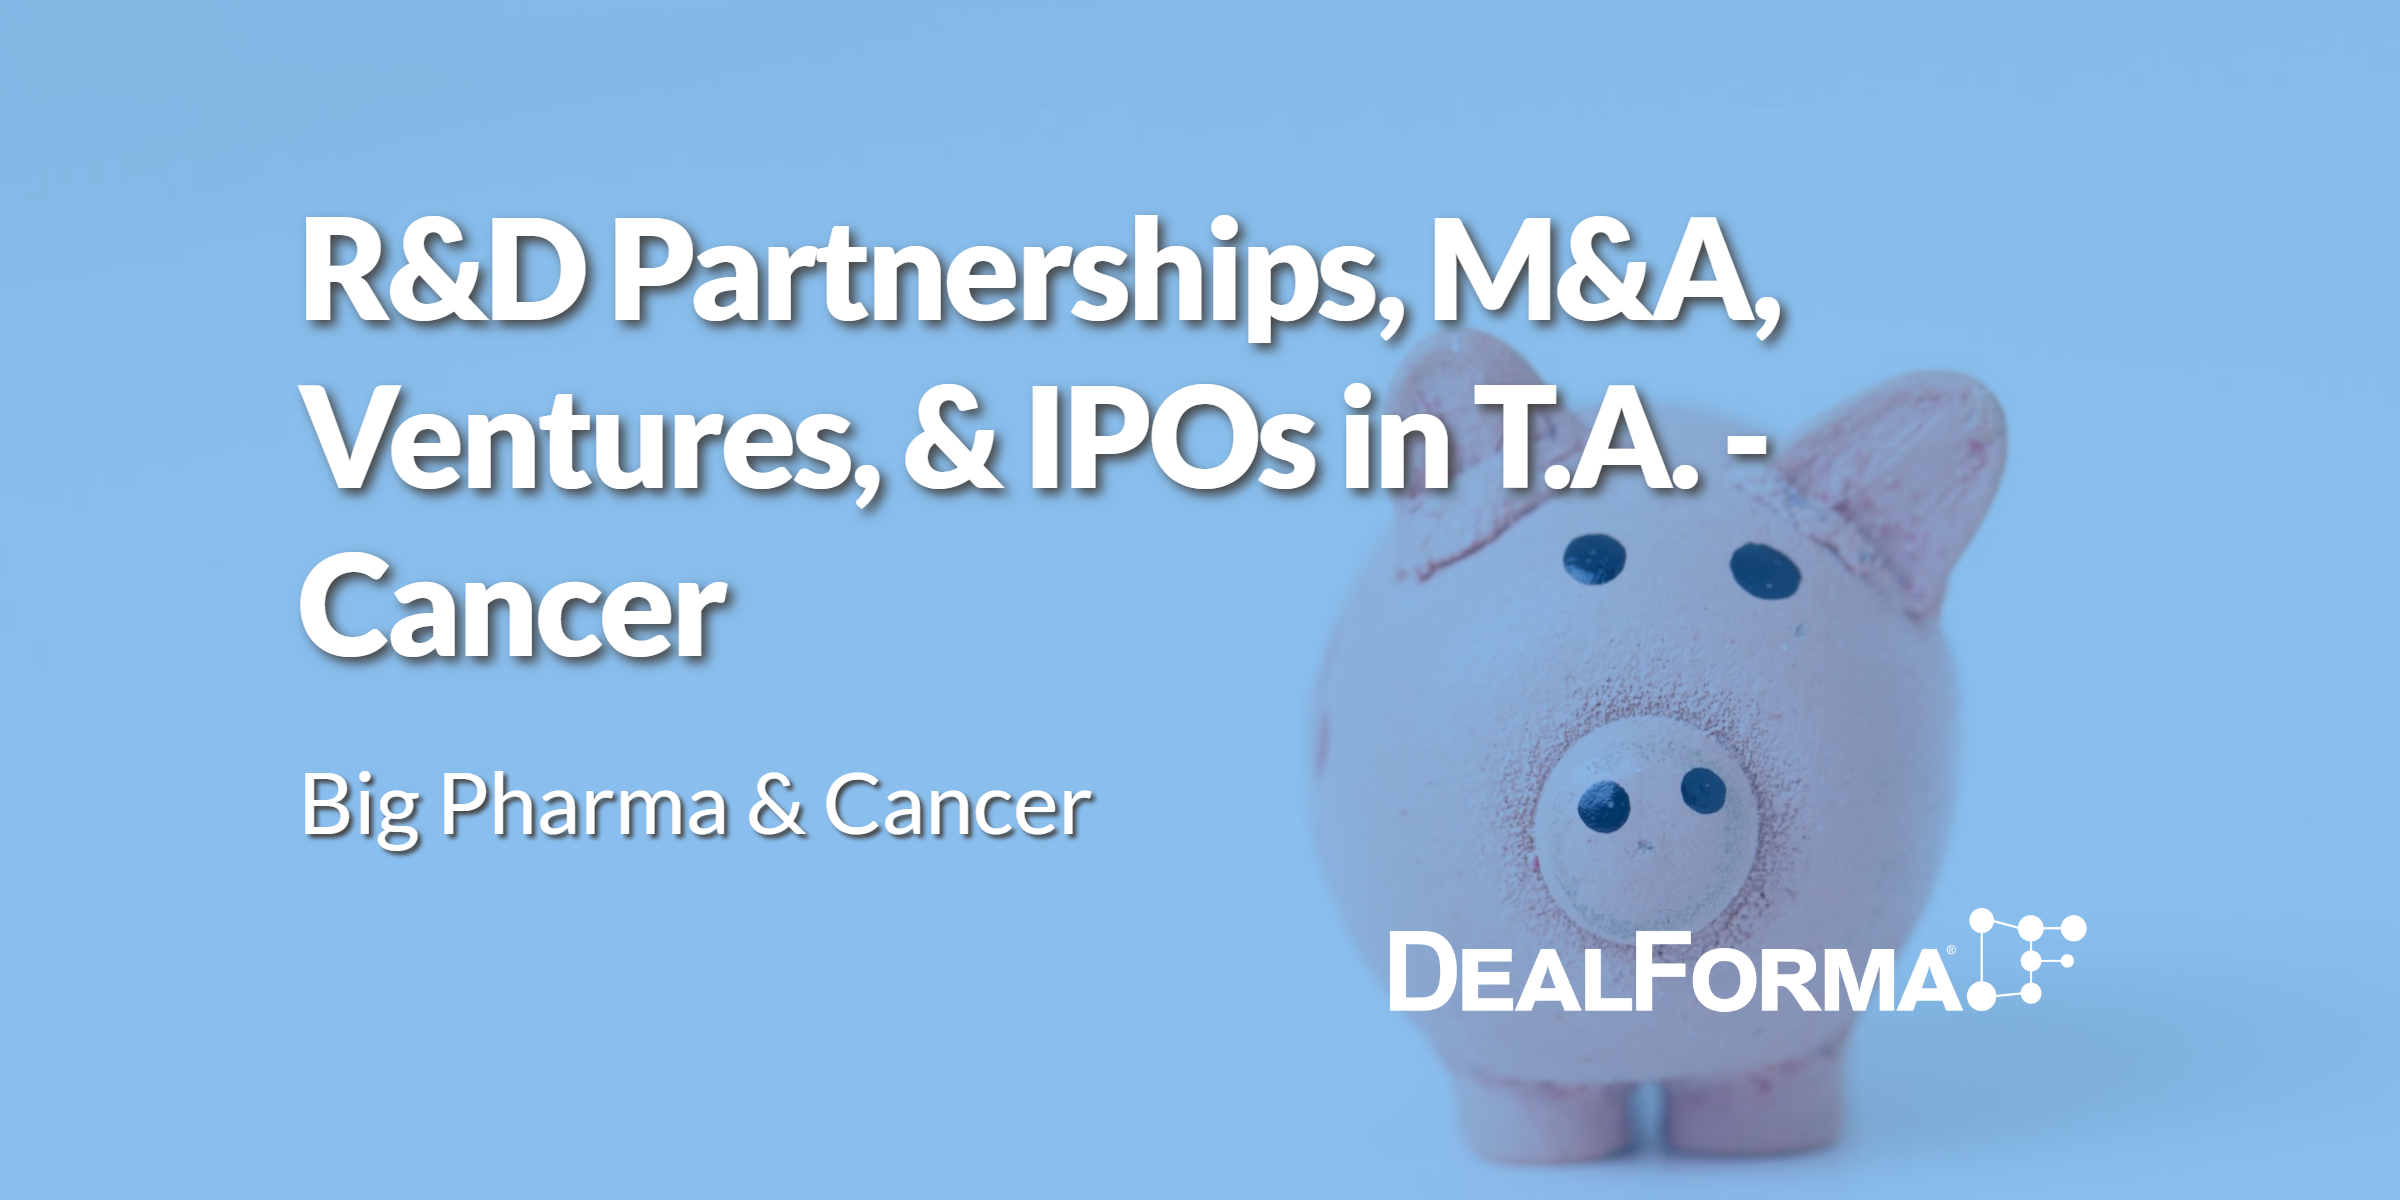 R&D Partnerships, M&A, Ventures, & IPOs in T.A. – Cancer